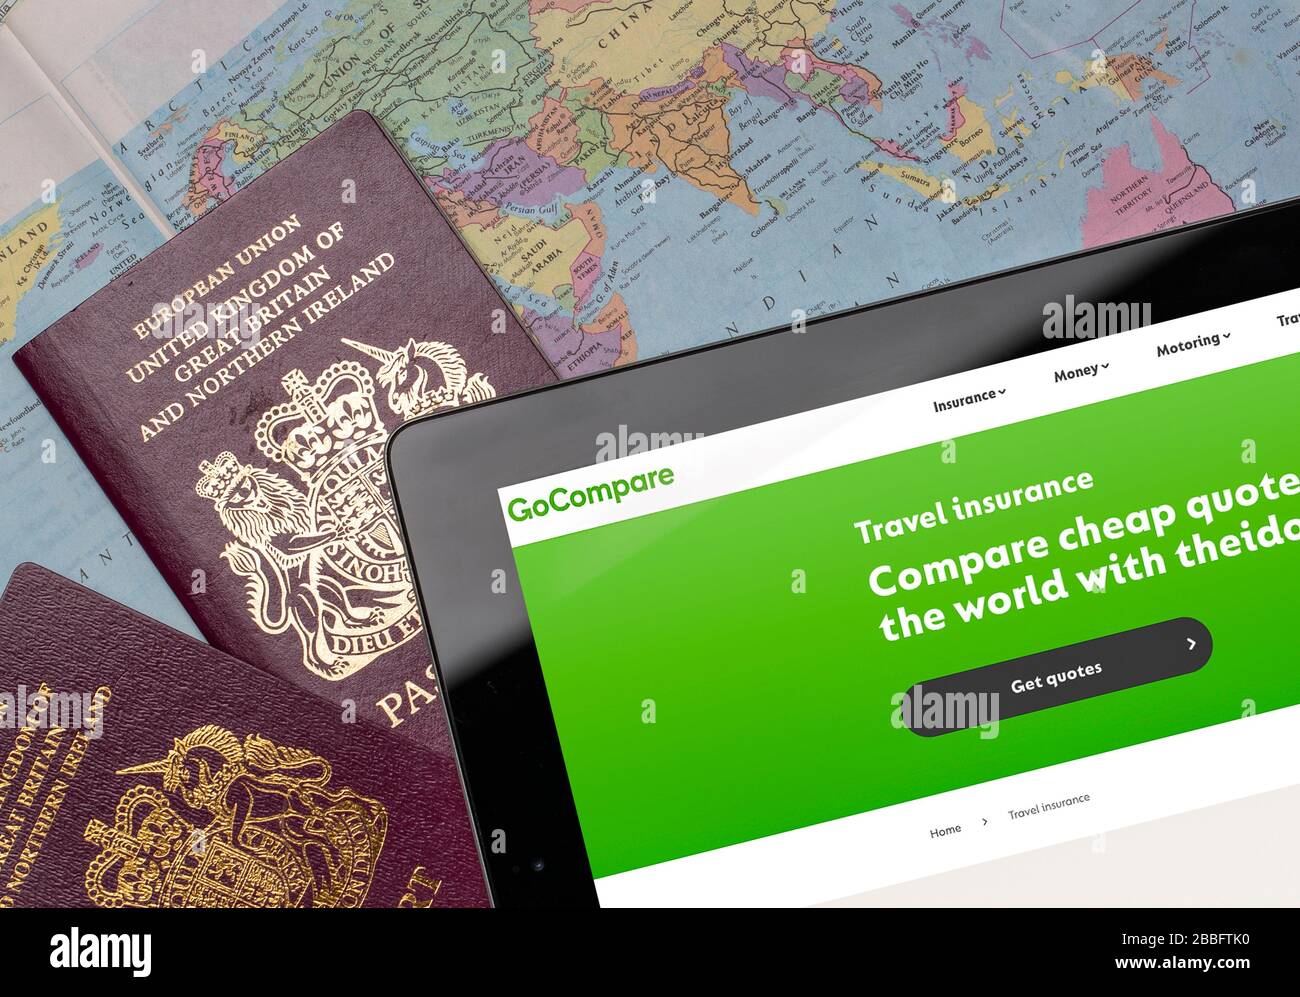 GoCompare Travel insurance comparison website on an iPad or tablet. (editorial use only) Stock Photo